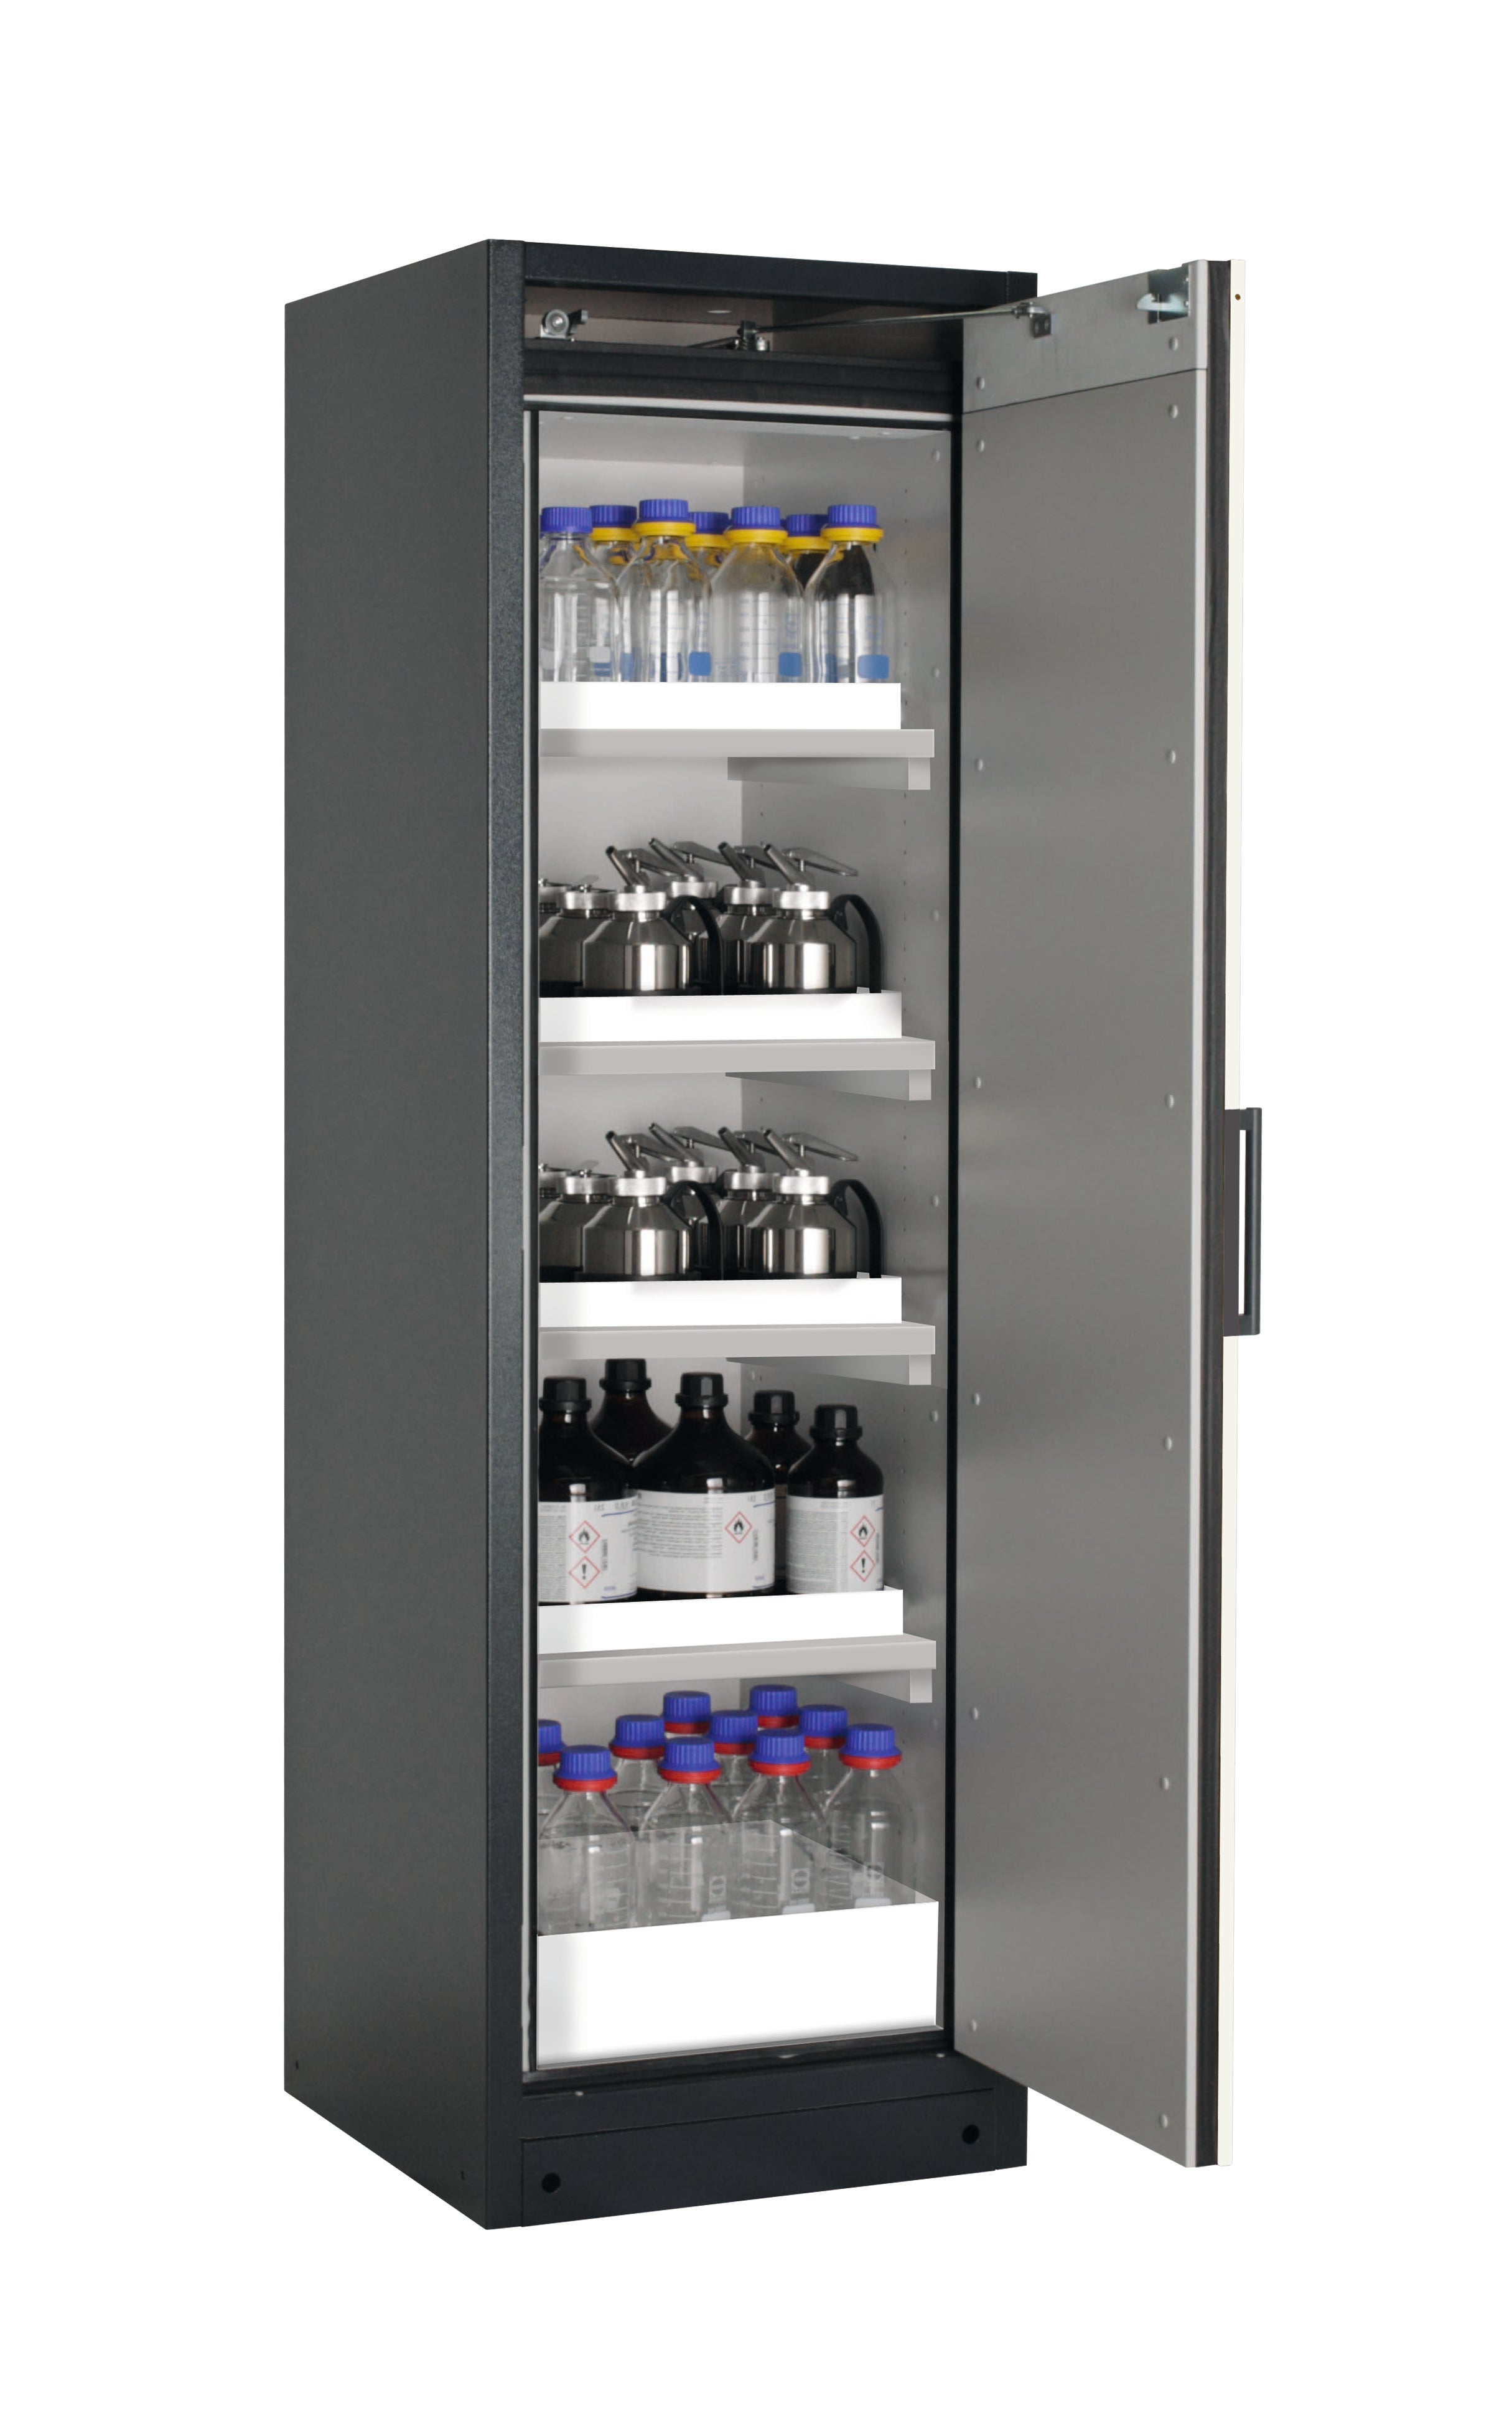 Type 90 safety storage cabinet Q-CLASSIC-90 model Q90.195.060.R in asecos silver with 4x tray shelf (standard) (polypropylene),